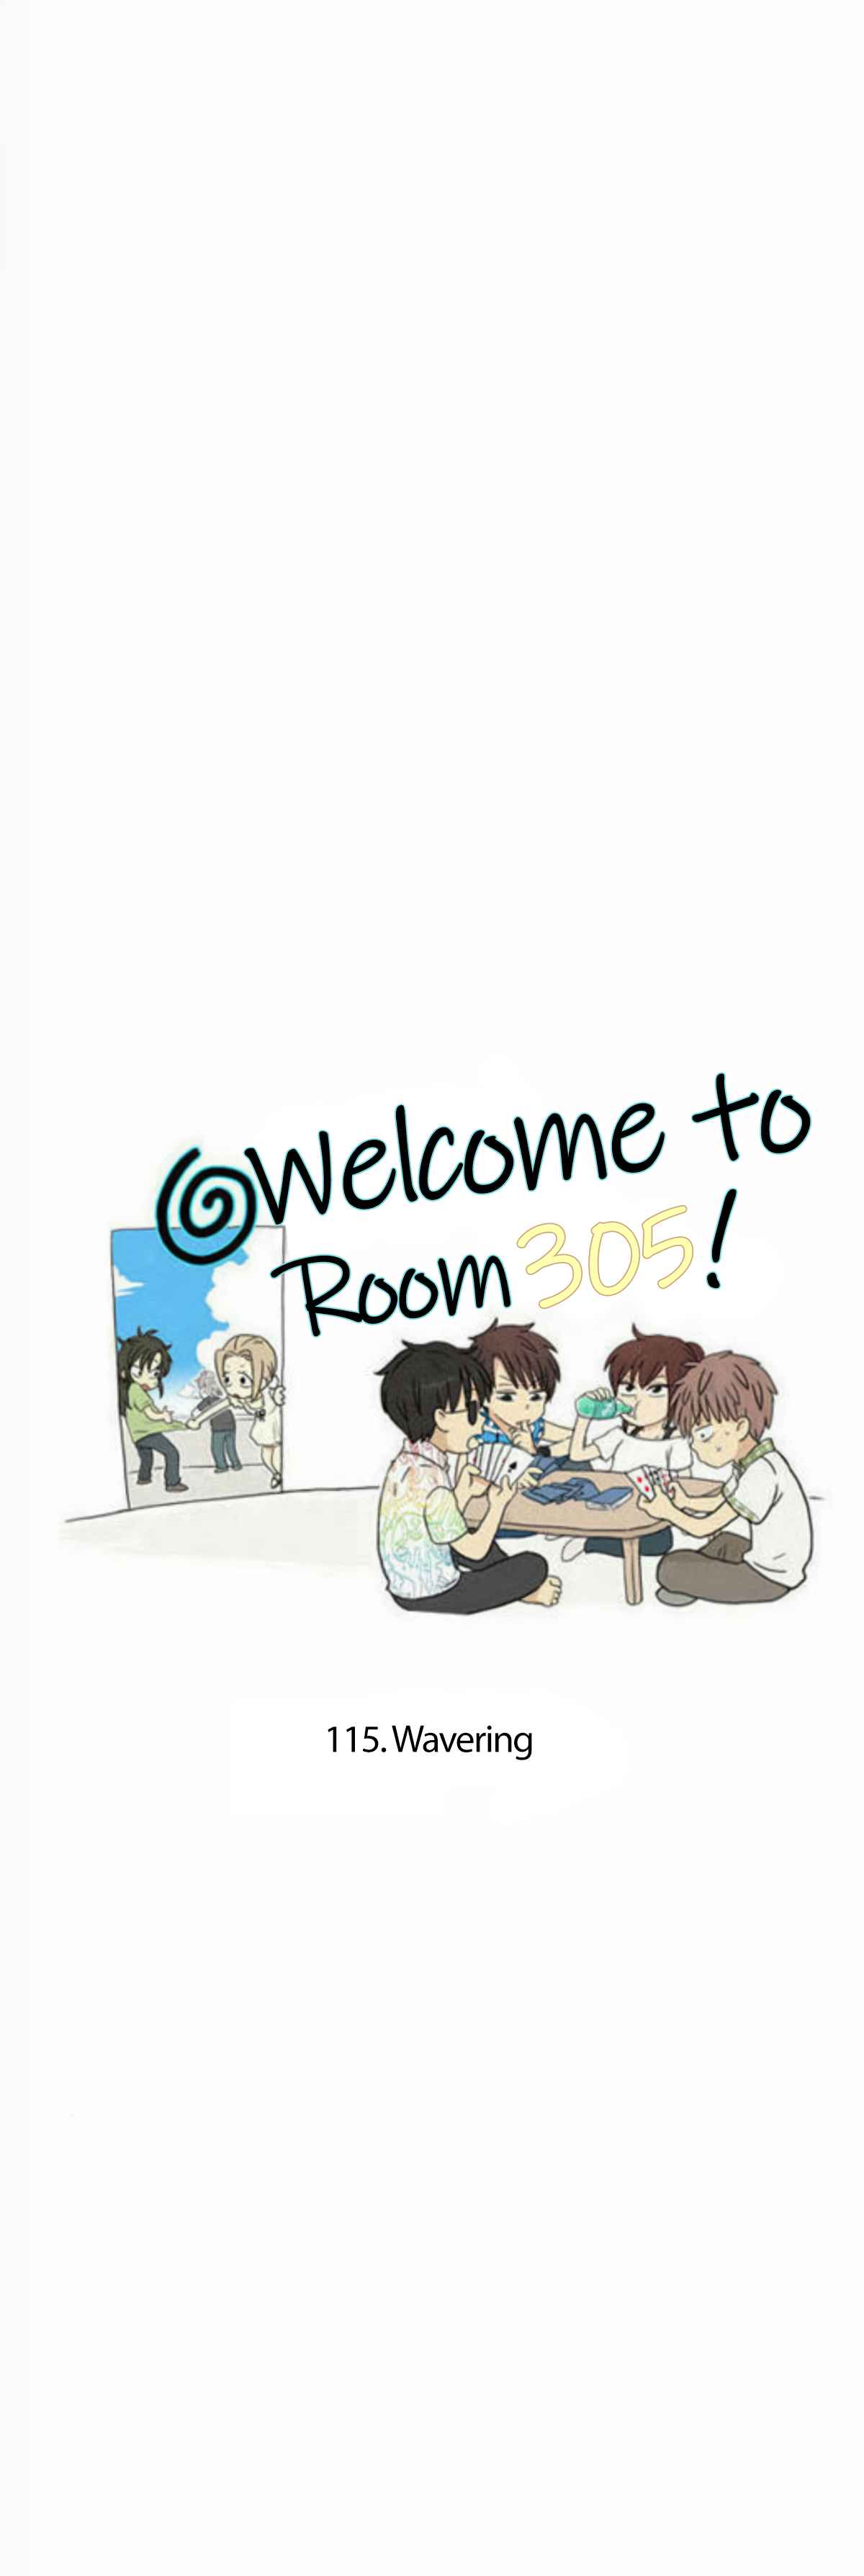 Welcome To Room #305! Ch. 115 Wavering